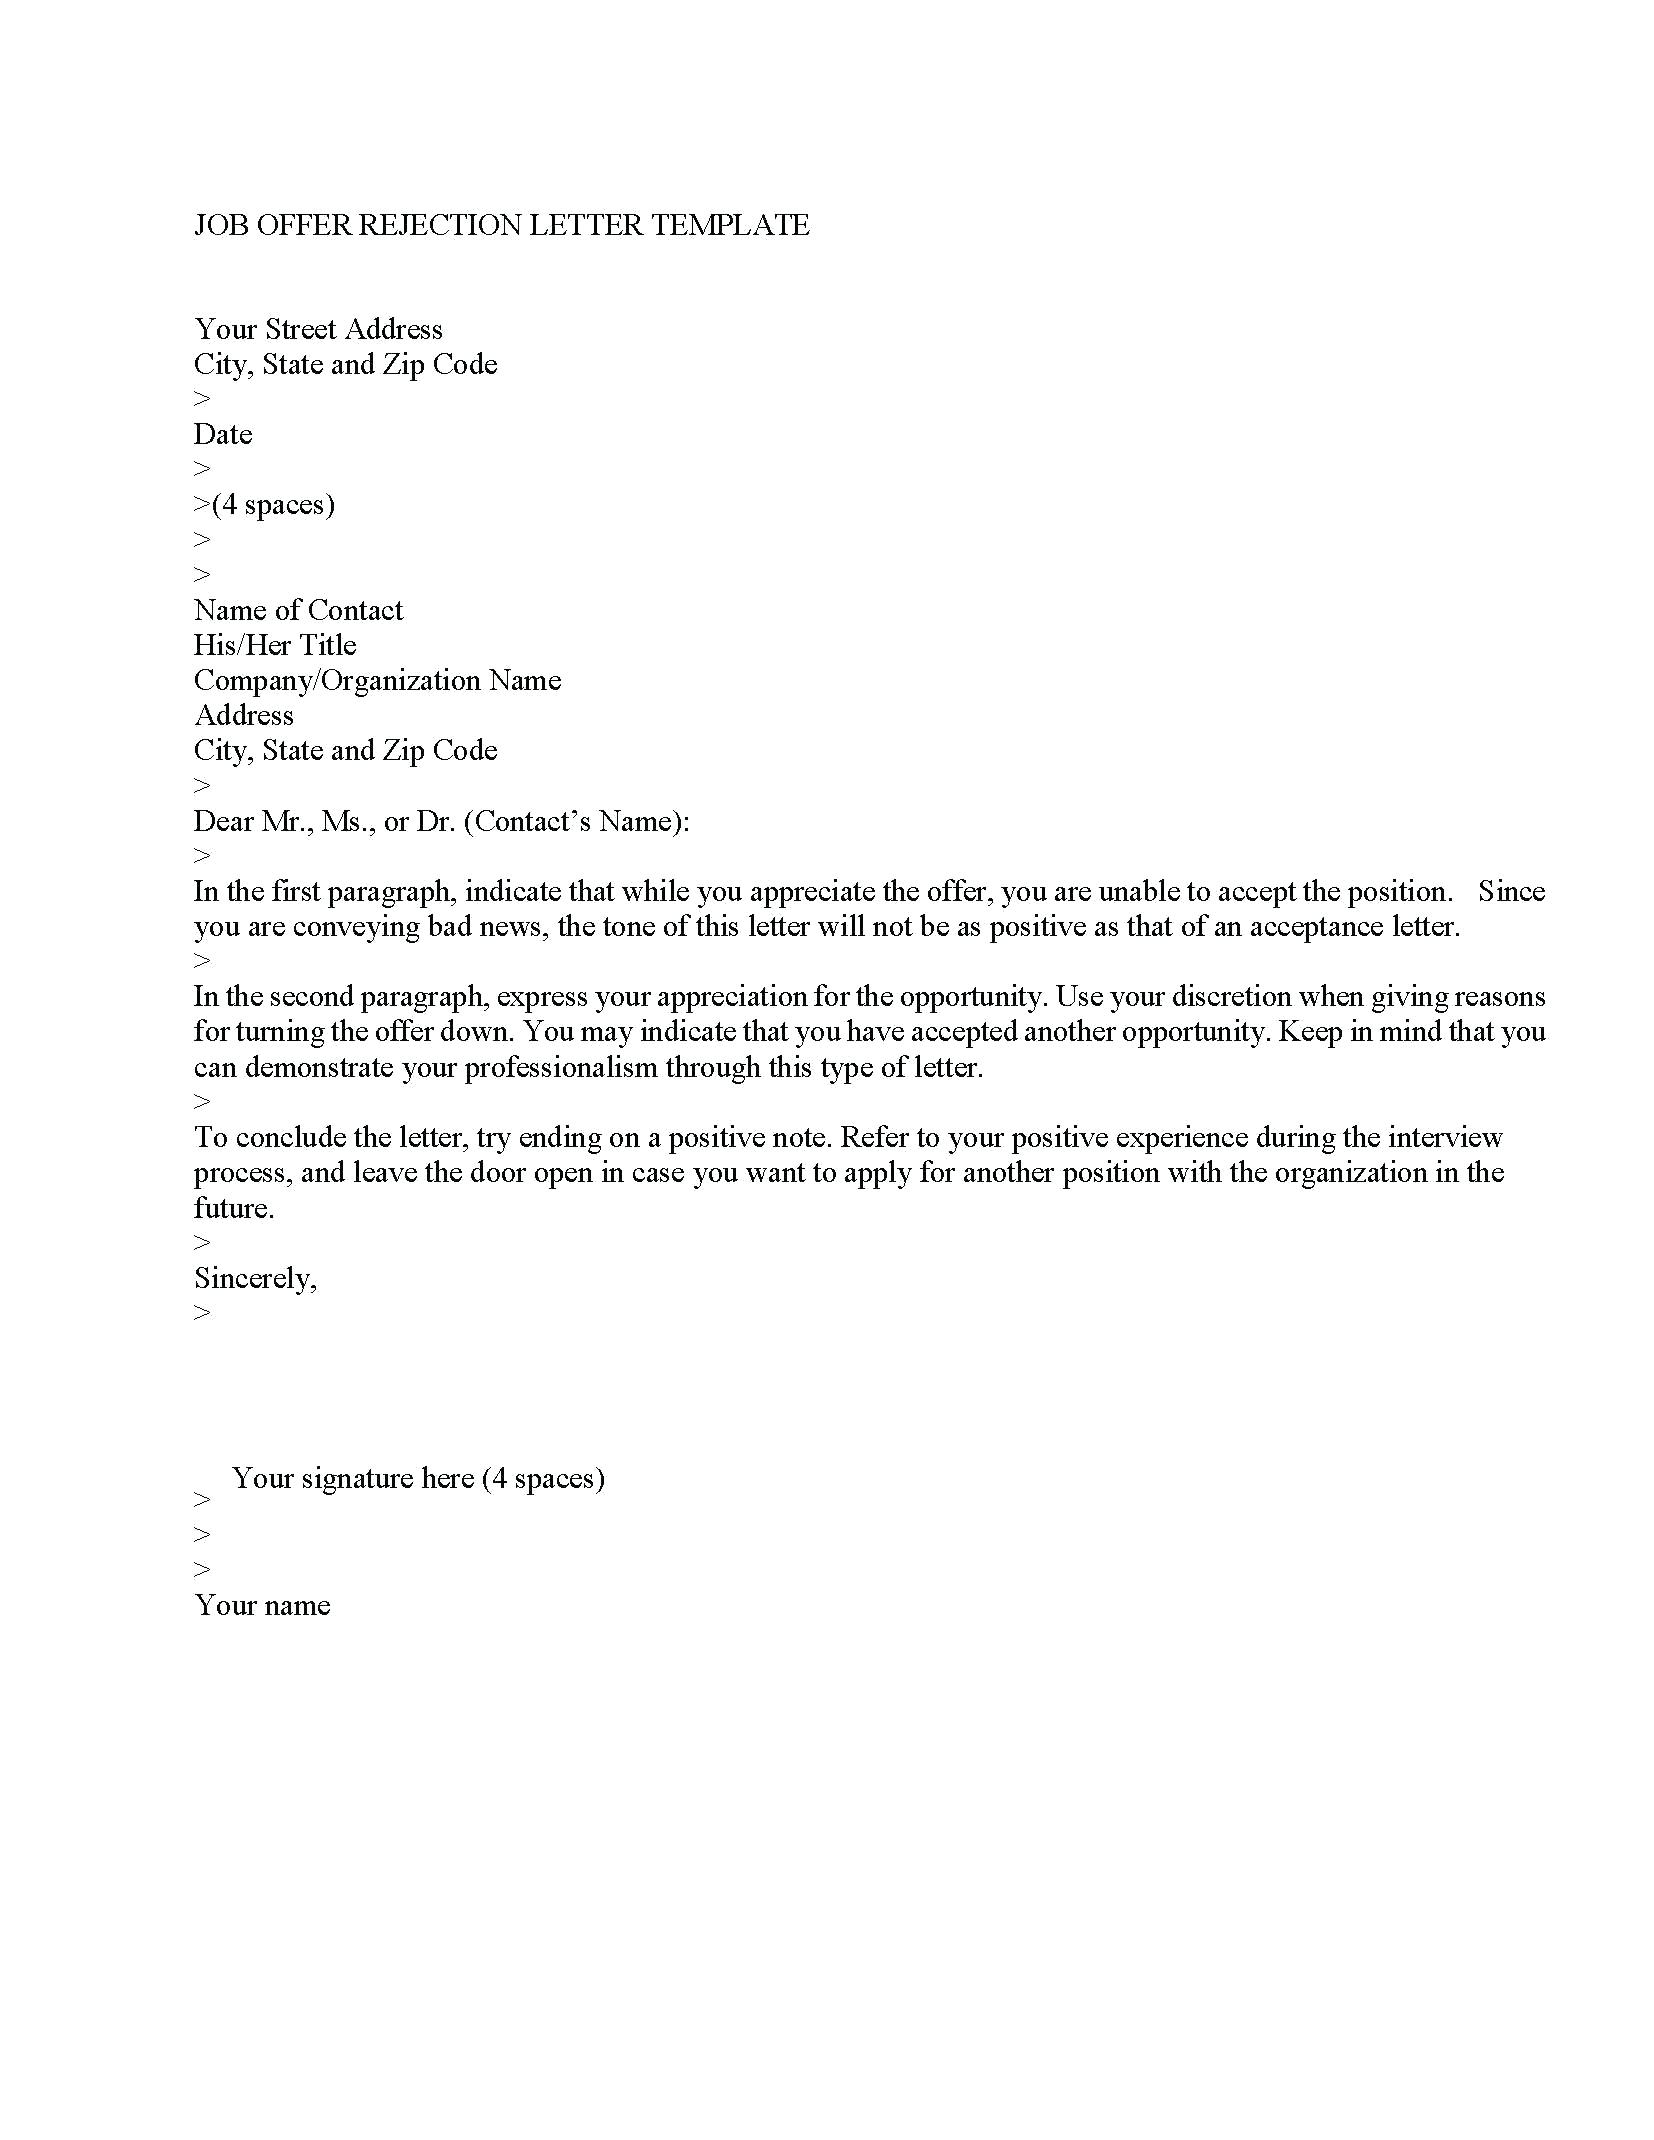 mortgage-commitment-letter-template-examples-letter-template-collection